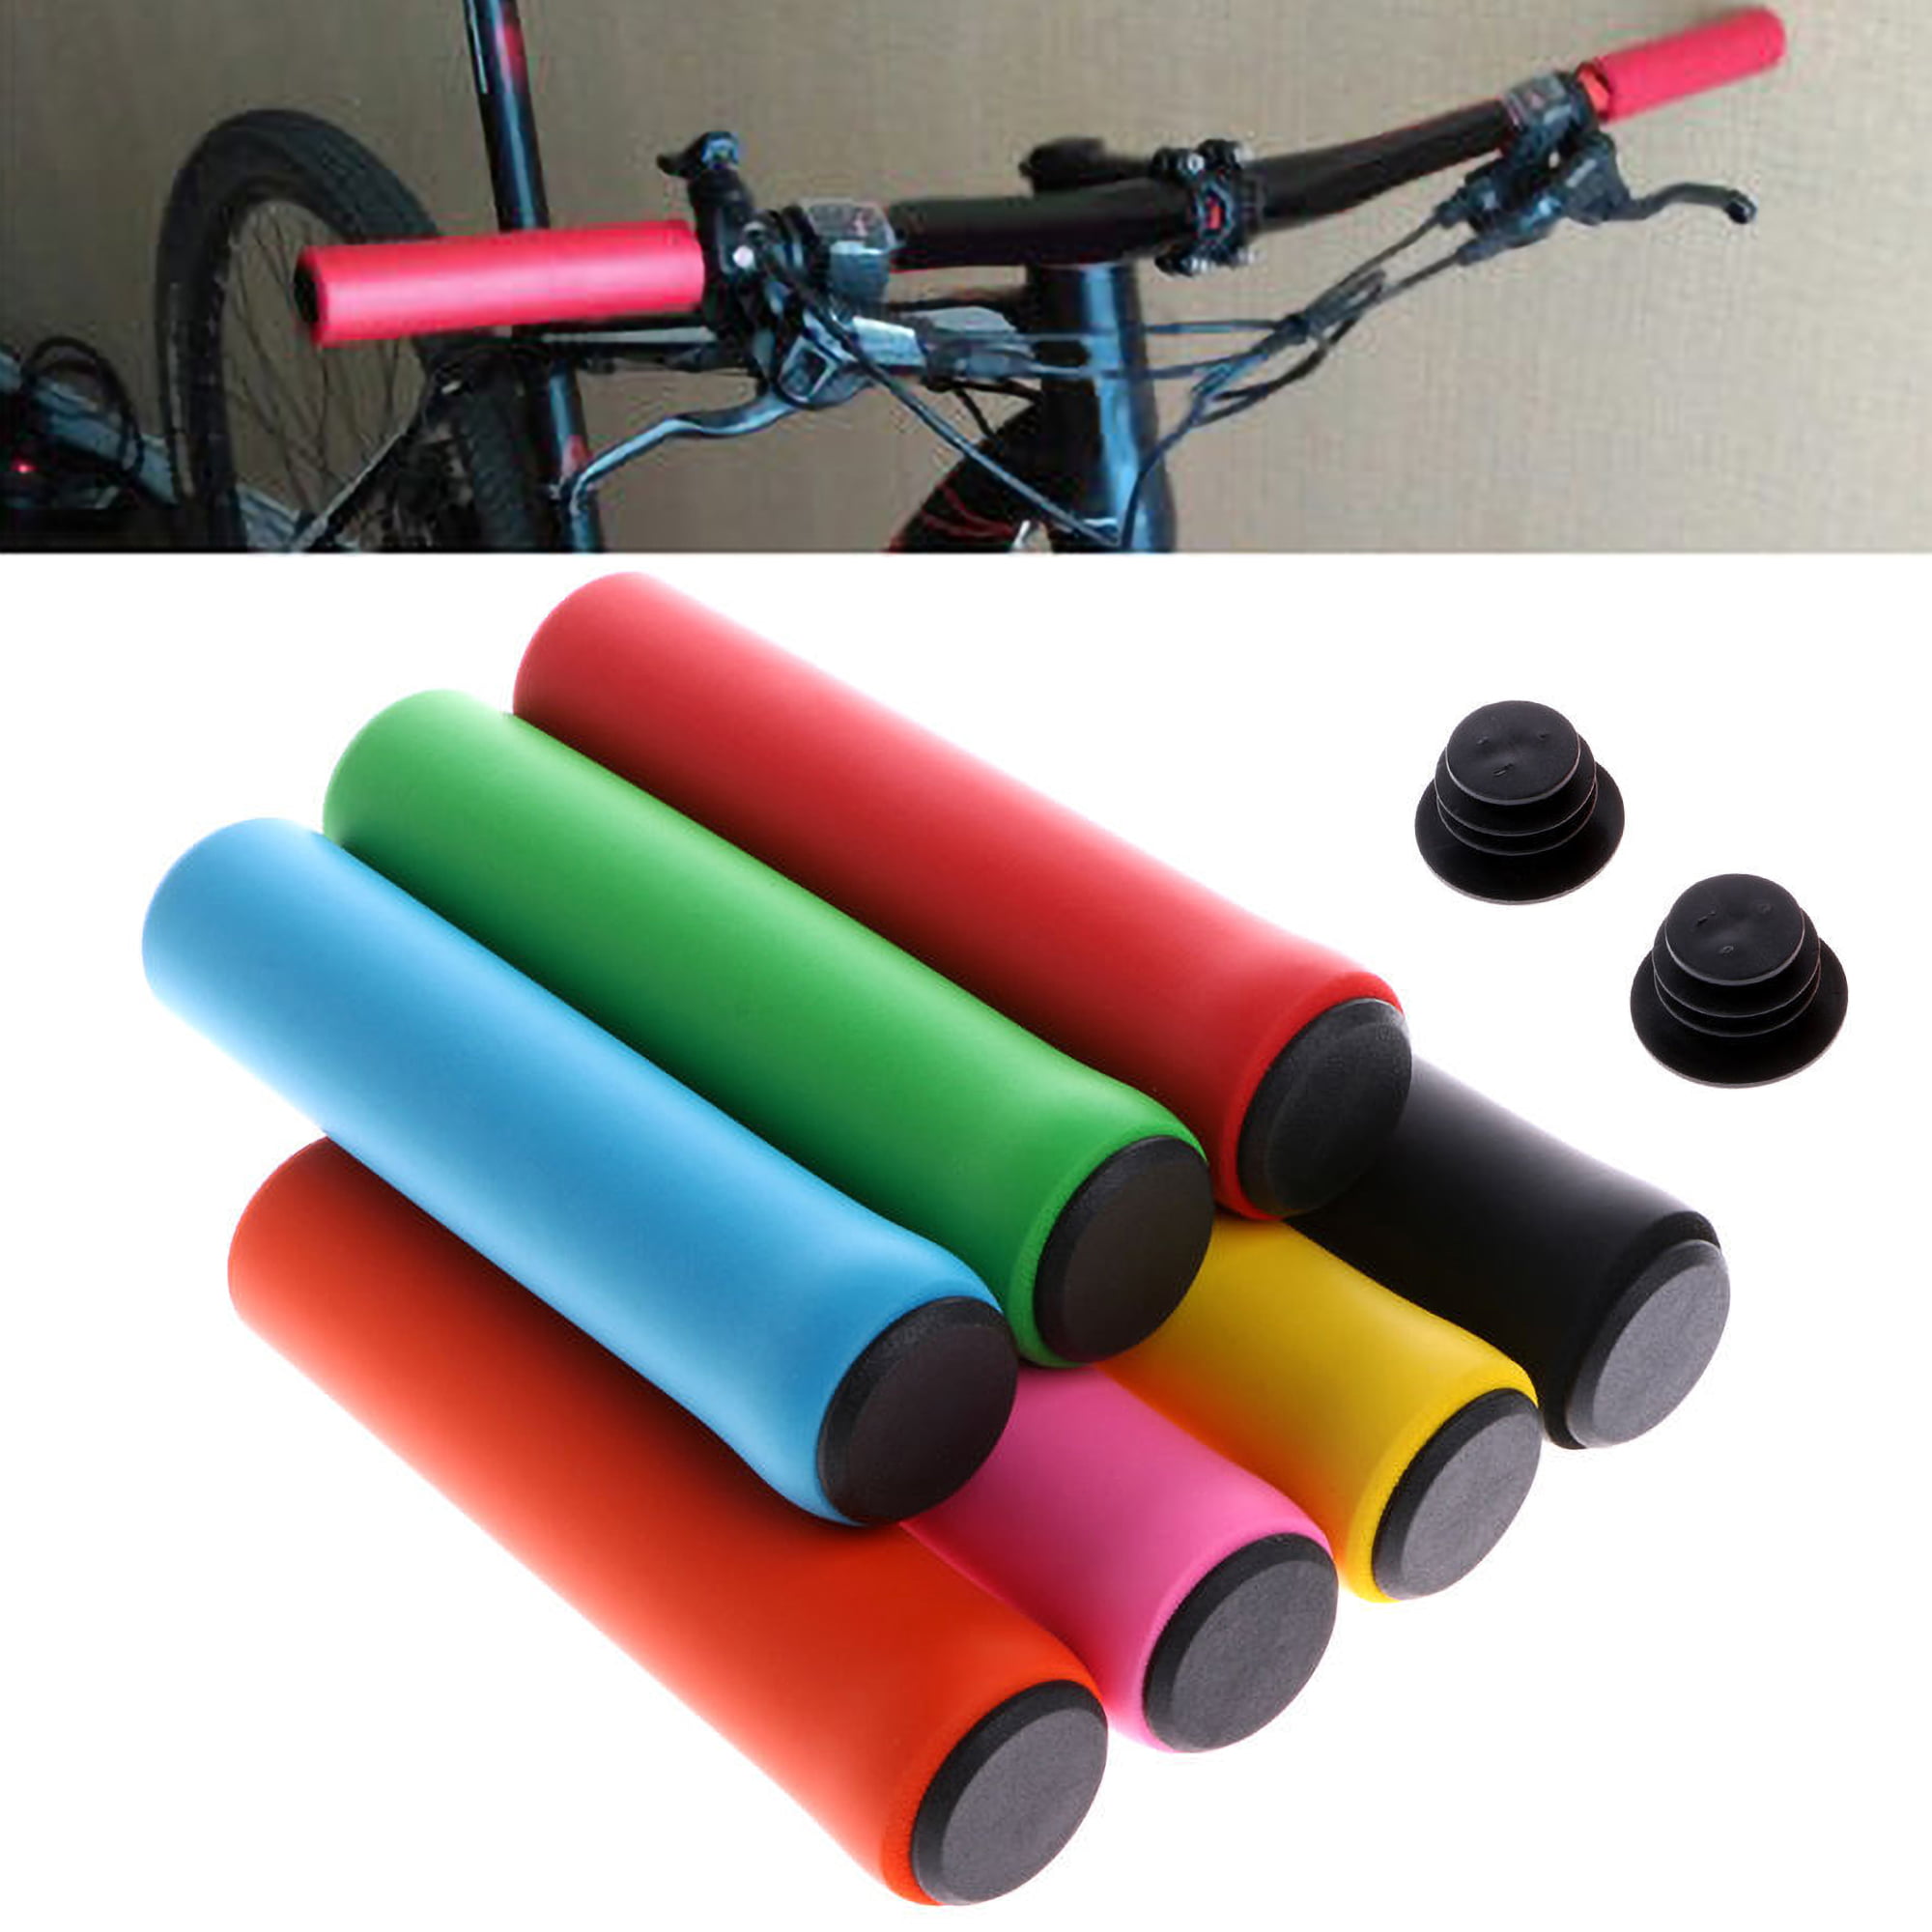 Details about   Mountain Bike Bicycle Motorcycle Anti-slip Soft Foam Handle Bar Ends Hand Grips 